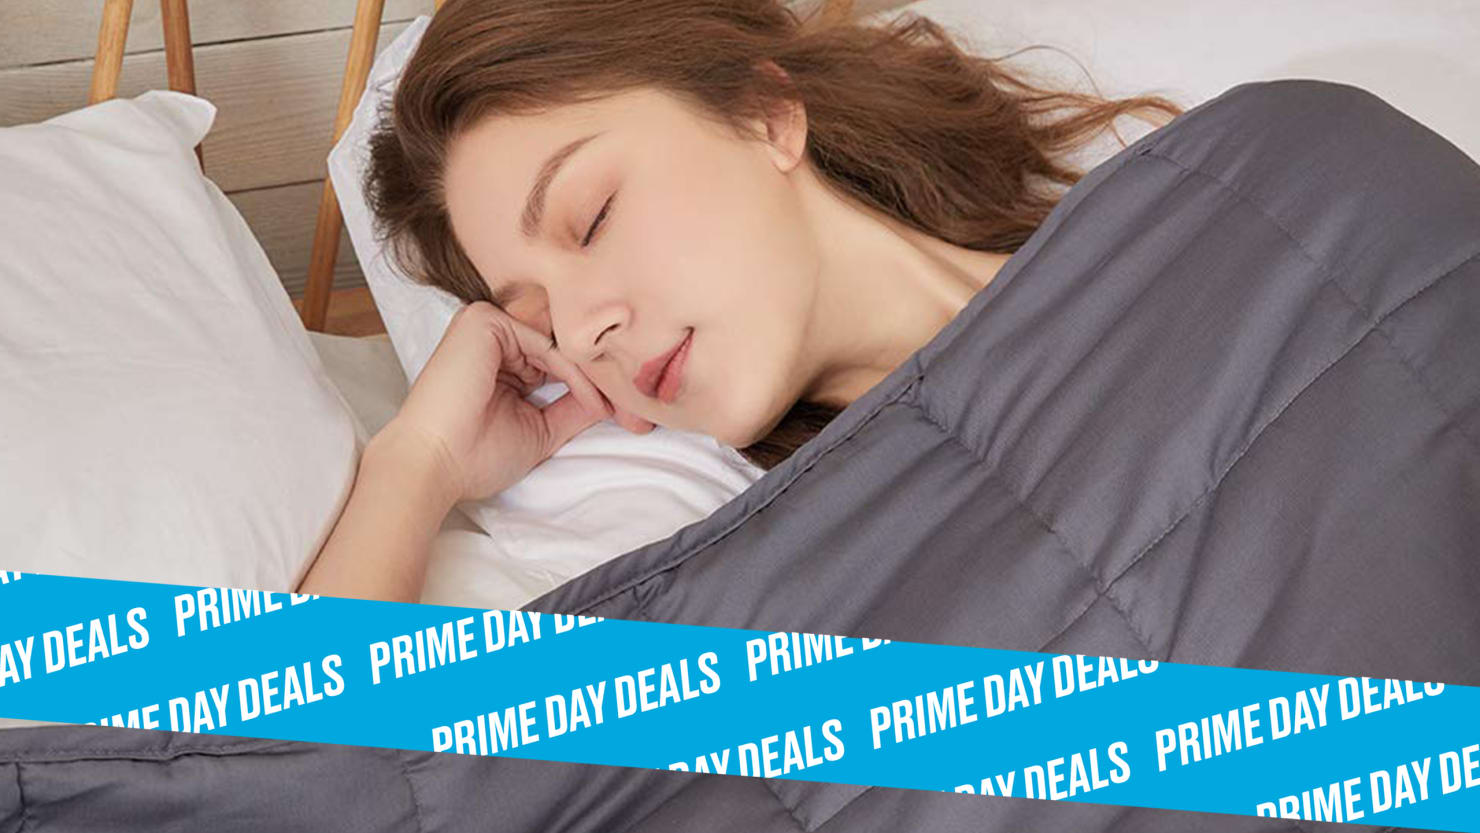 ZonLi Weighted Blankets are 20% Off for Prime Day